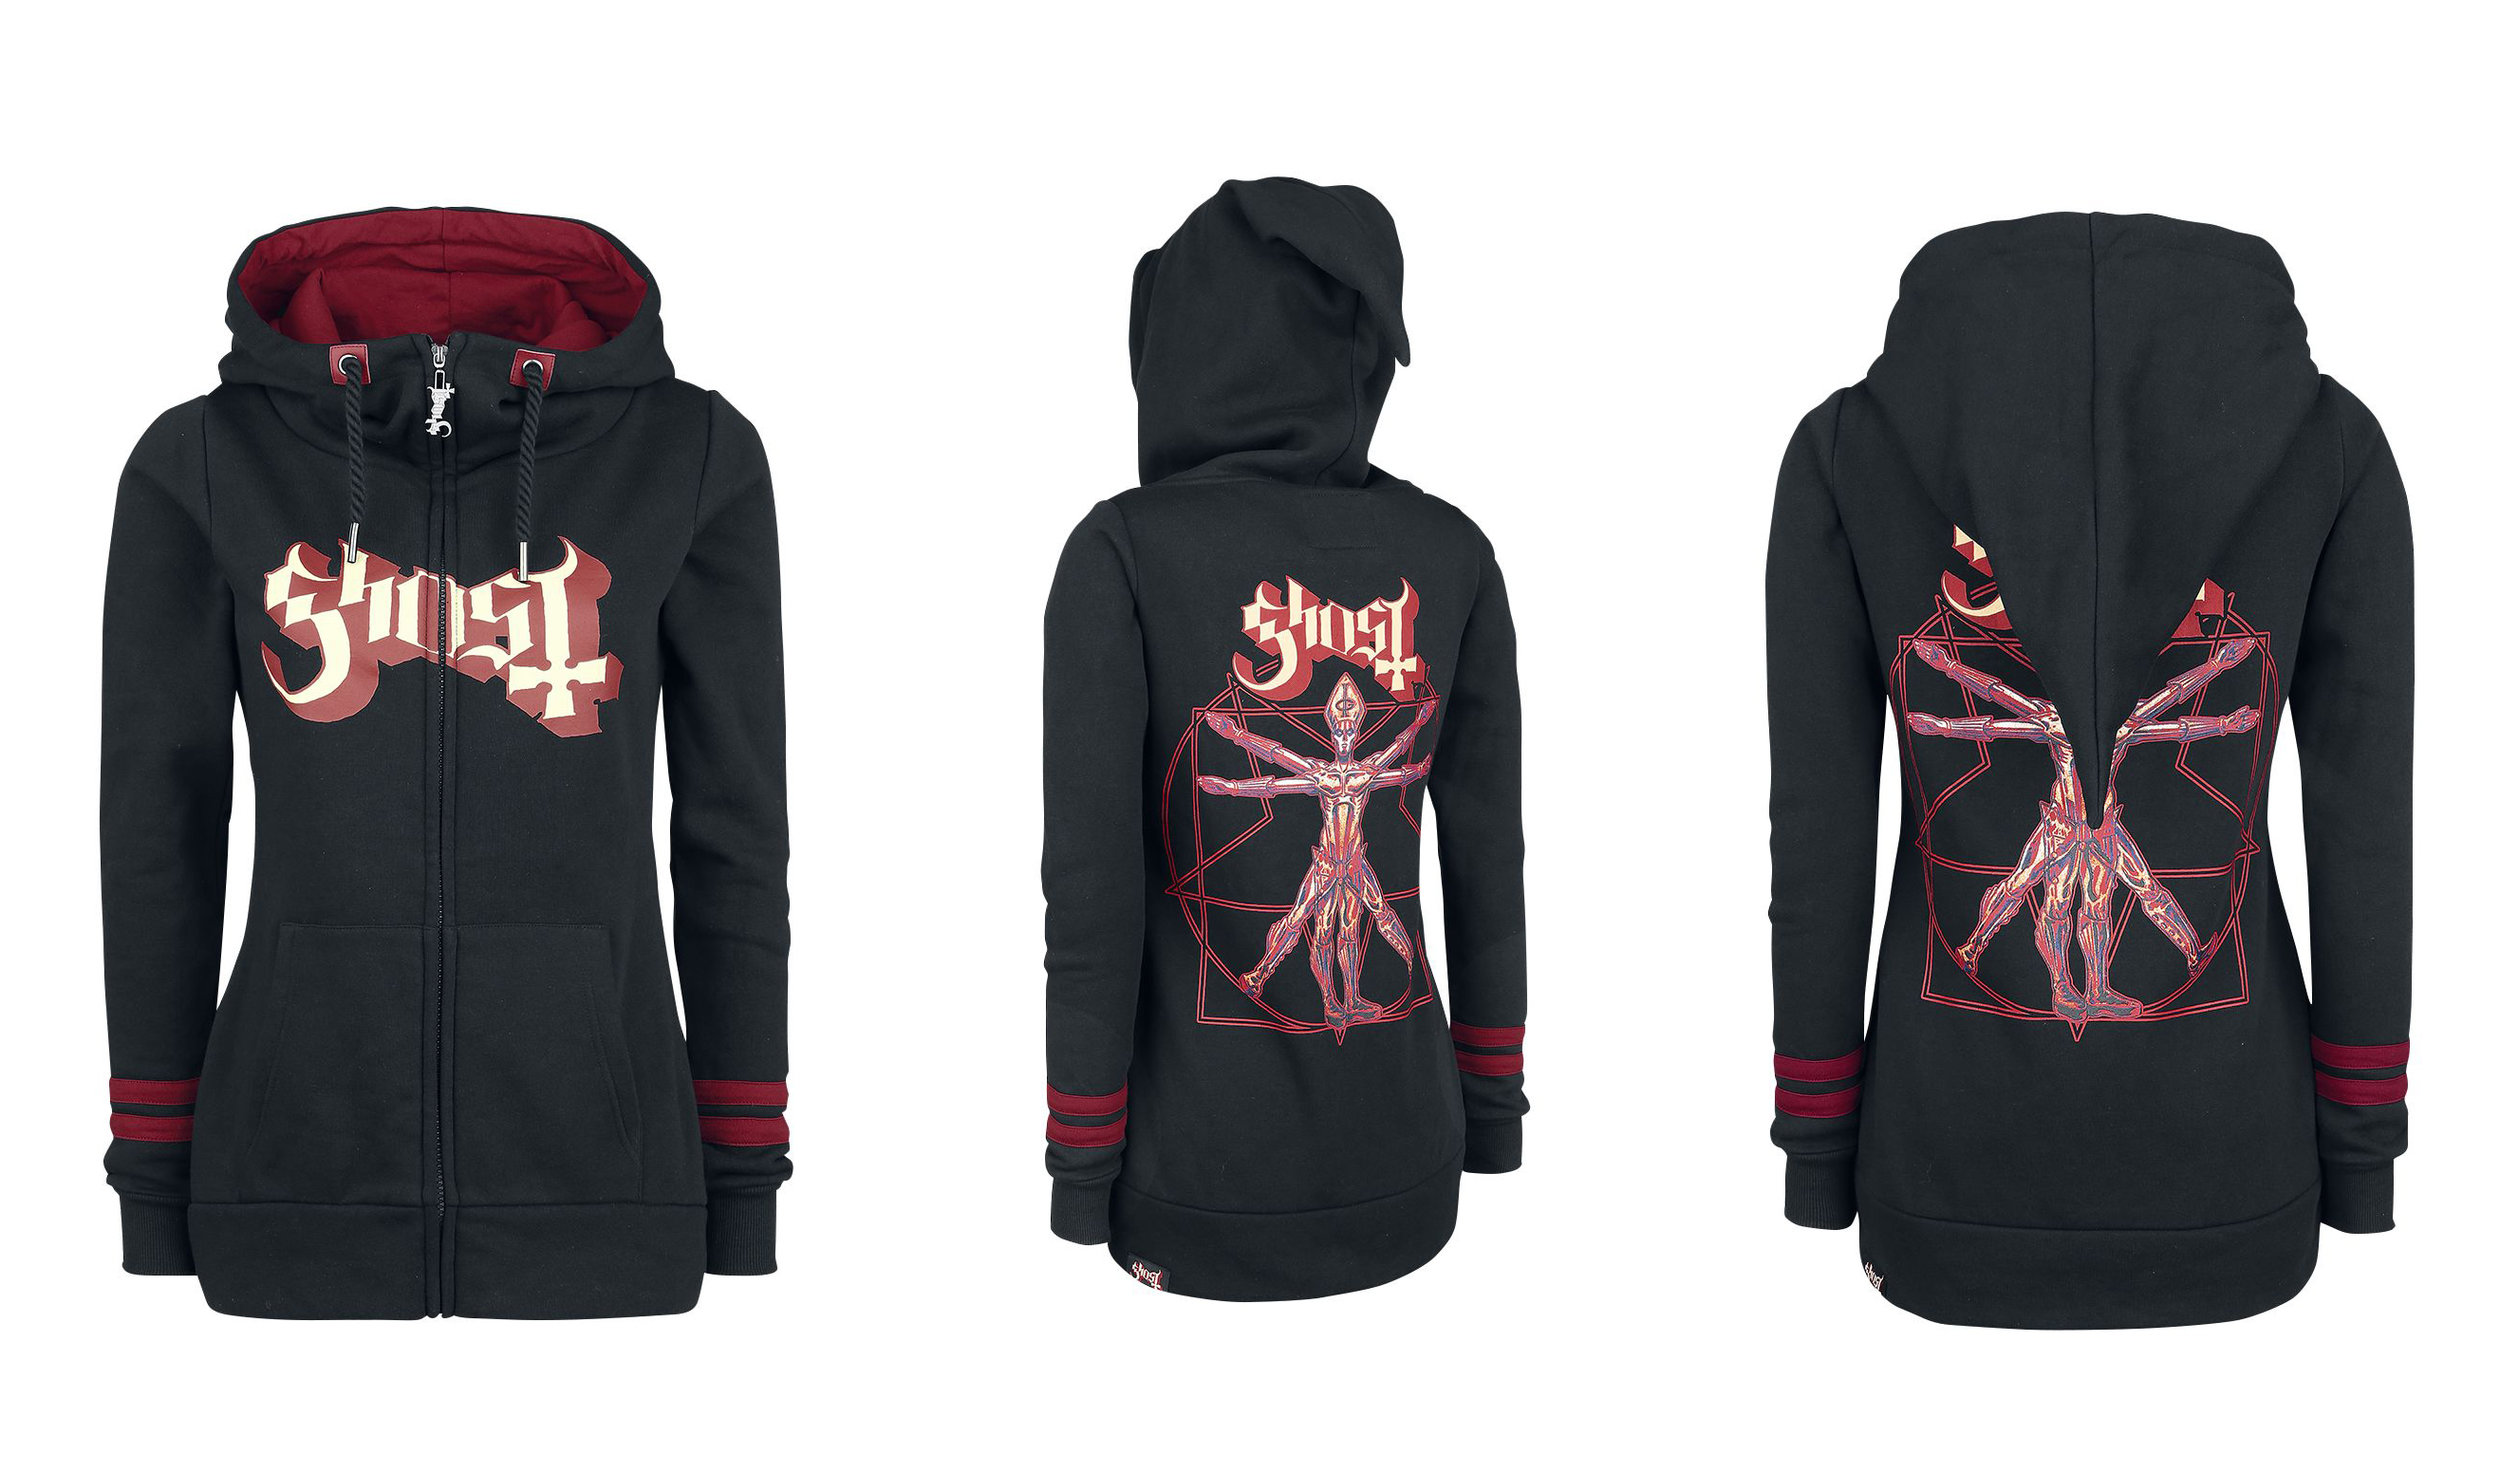   GHOST | Official Popestar hoodie |  EMP Signature Collection 2019 